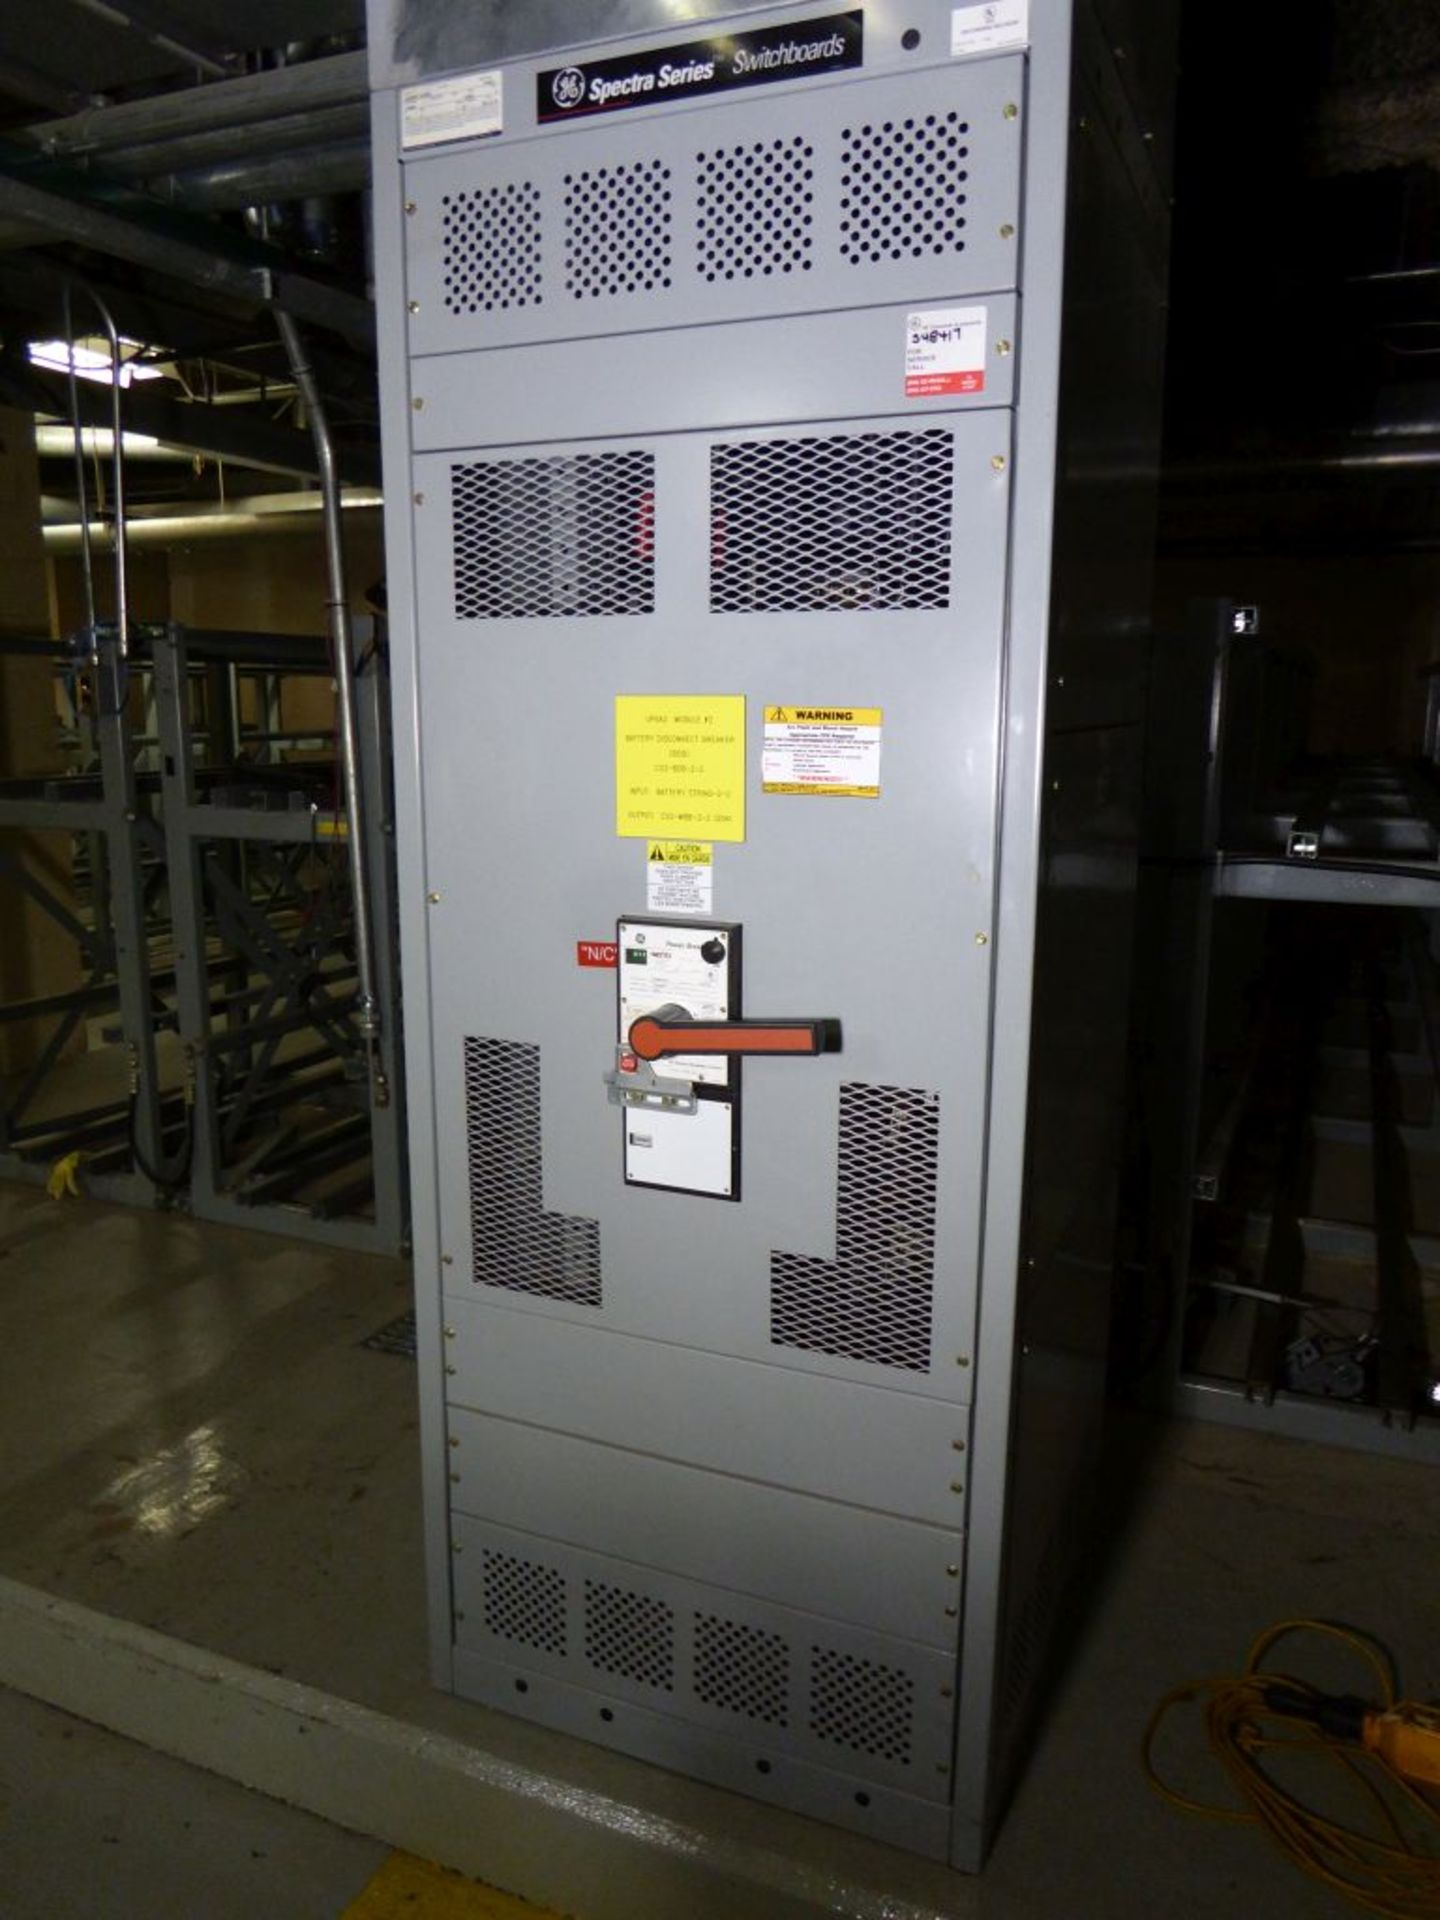 Charlotte, NC - GE 2000A Spectra Series Switchboard - Image 3 of 7